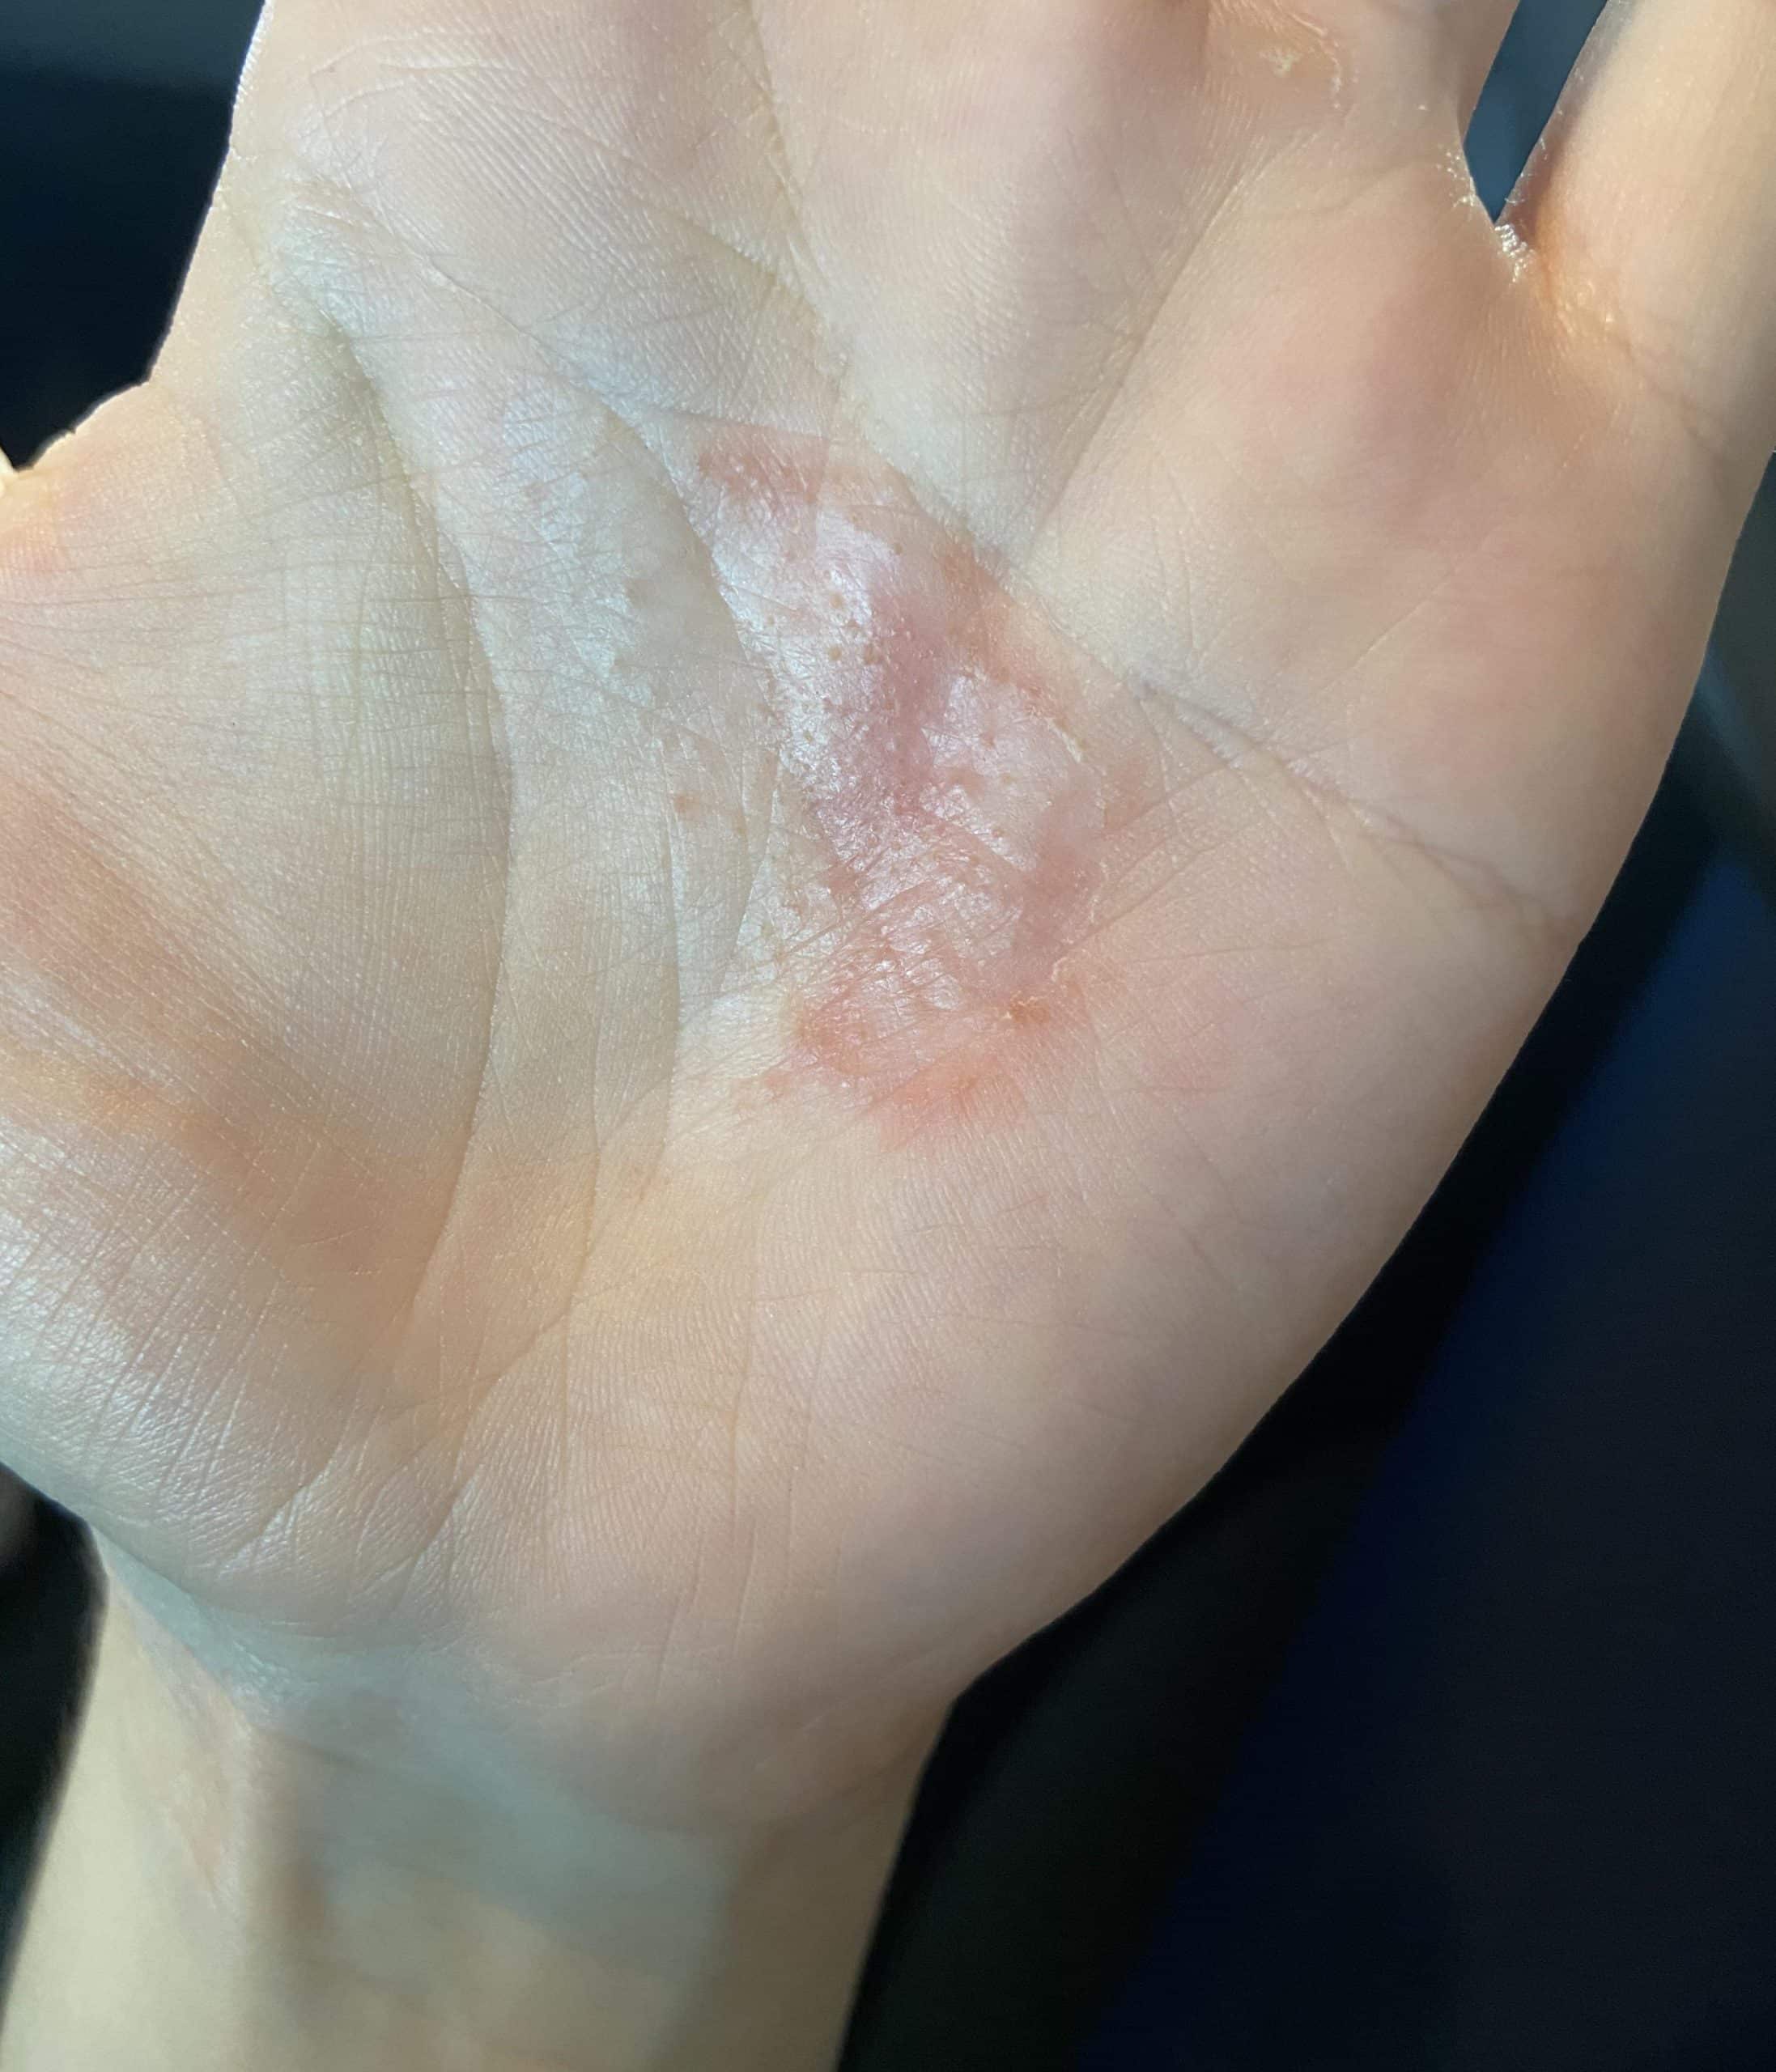 This is only on one hand and has been diagnosed as eczema but keeps ...